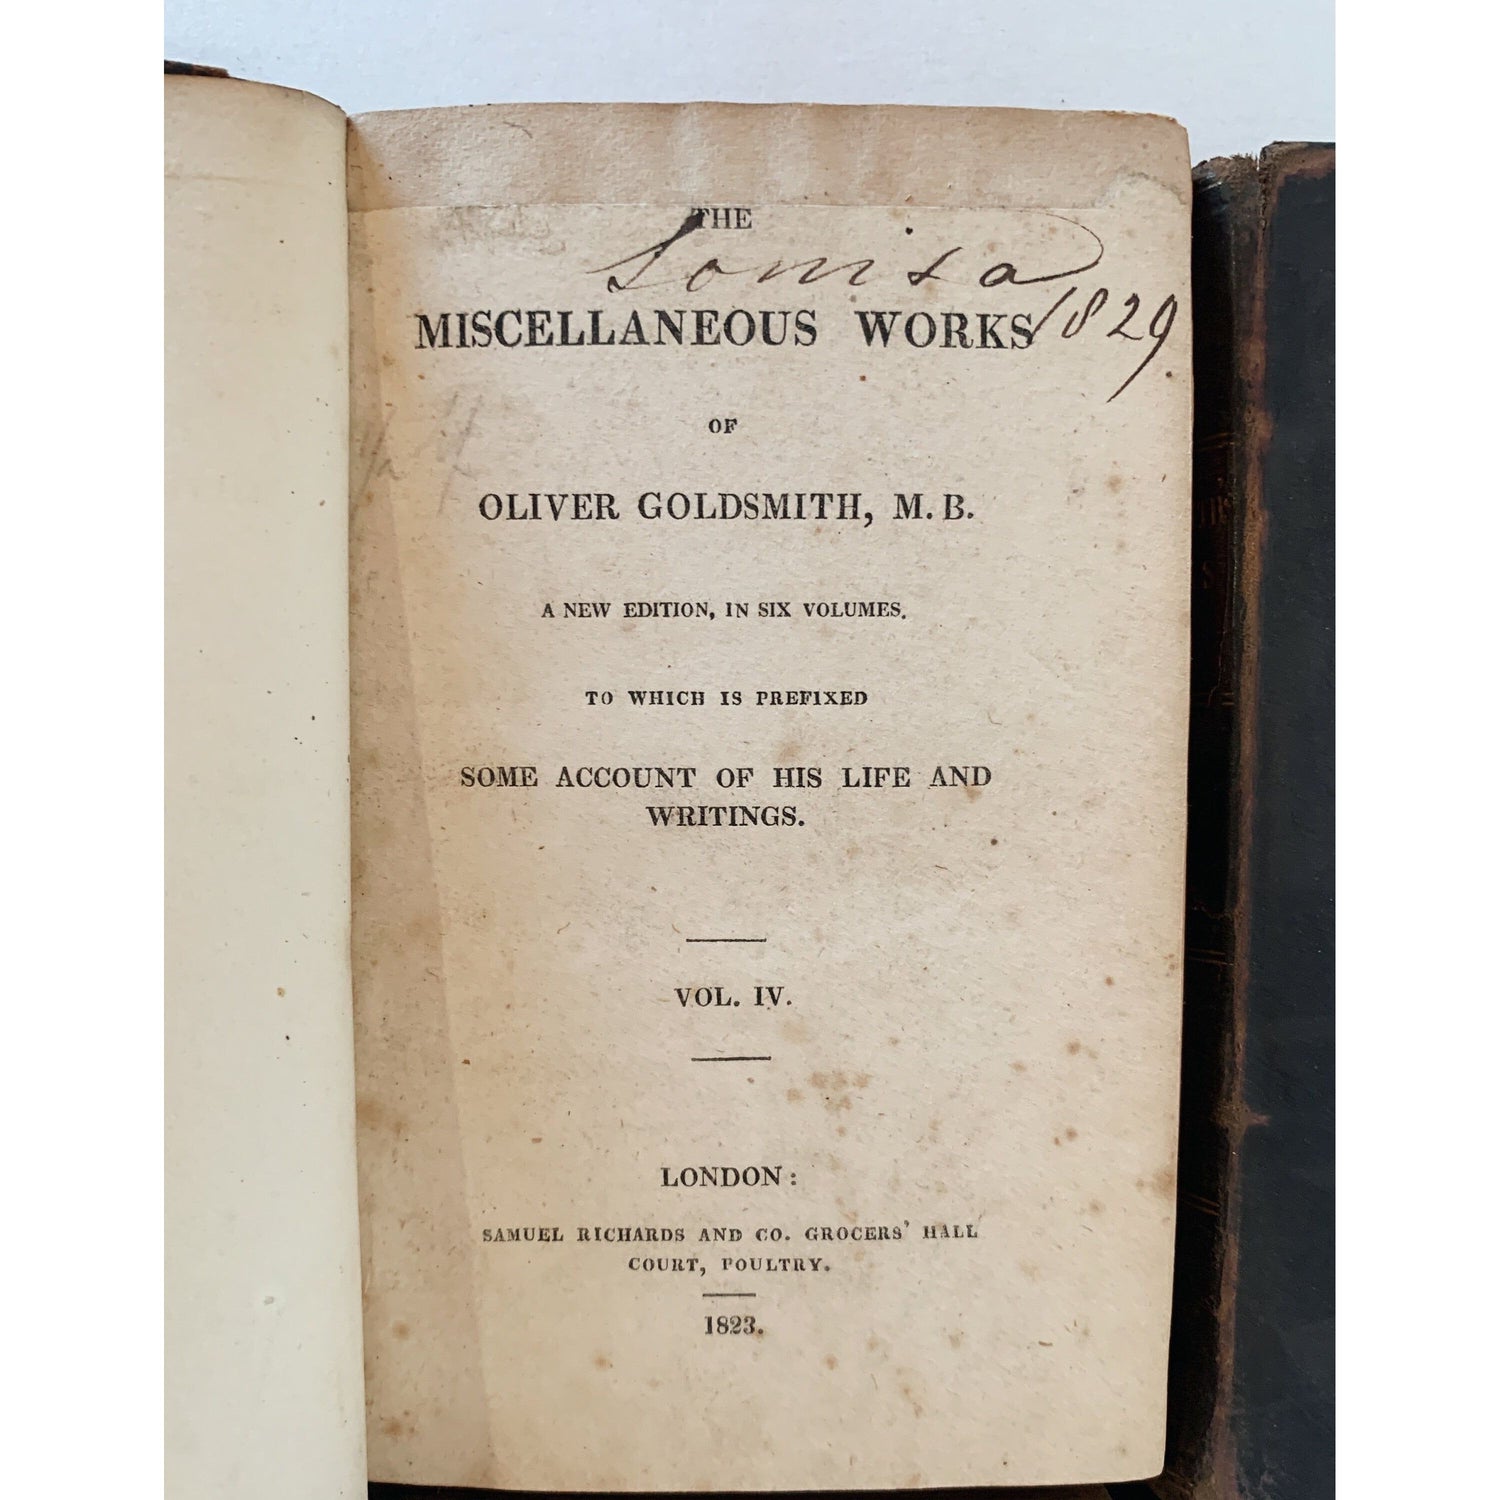 The Miscellaneous Works of Oliver Goldsmith: A New Edition in Six Volumes, 1829